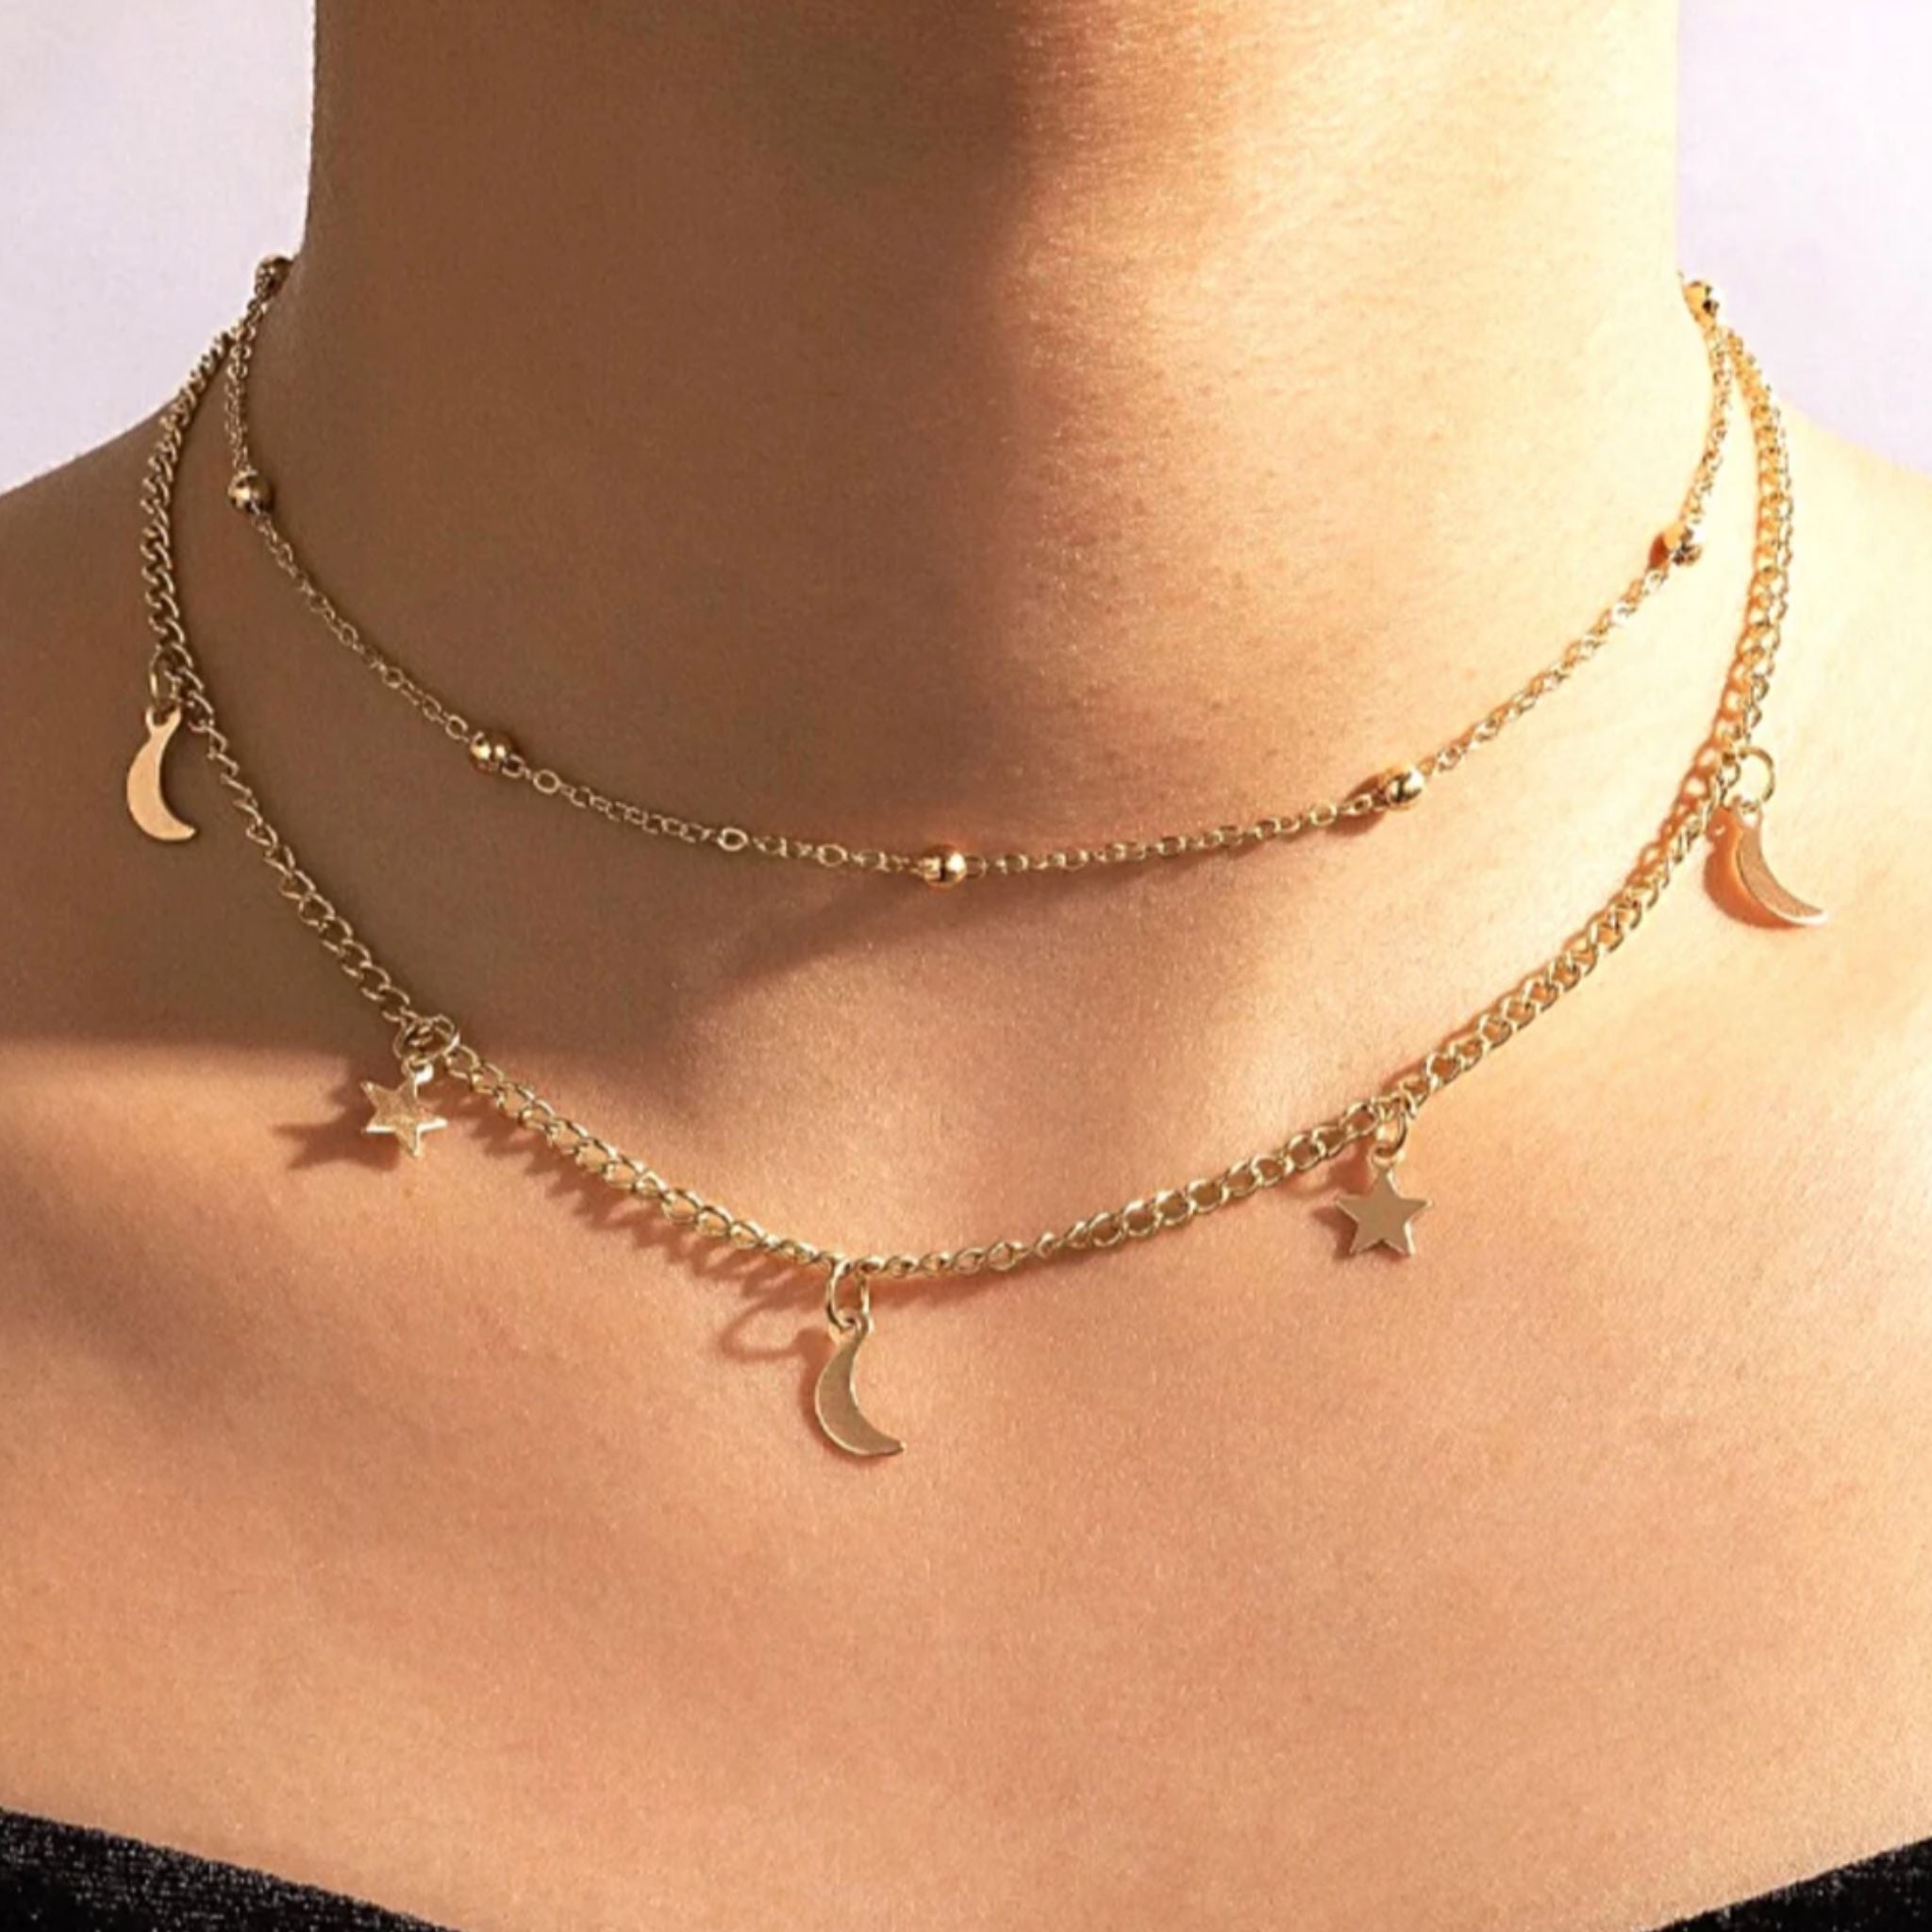 Buy Custom Letter Charm Choker Necklace, Chain Necklace, Phrase Necklace,  Name Necklace, Initial Necklace, READ DESCRIPTION Online in India - Etsy